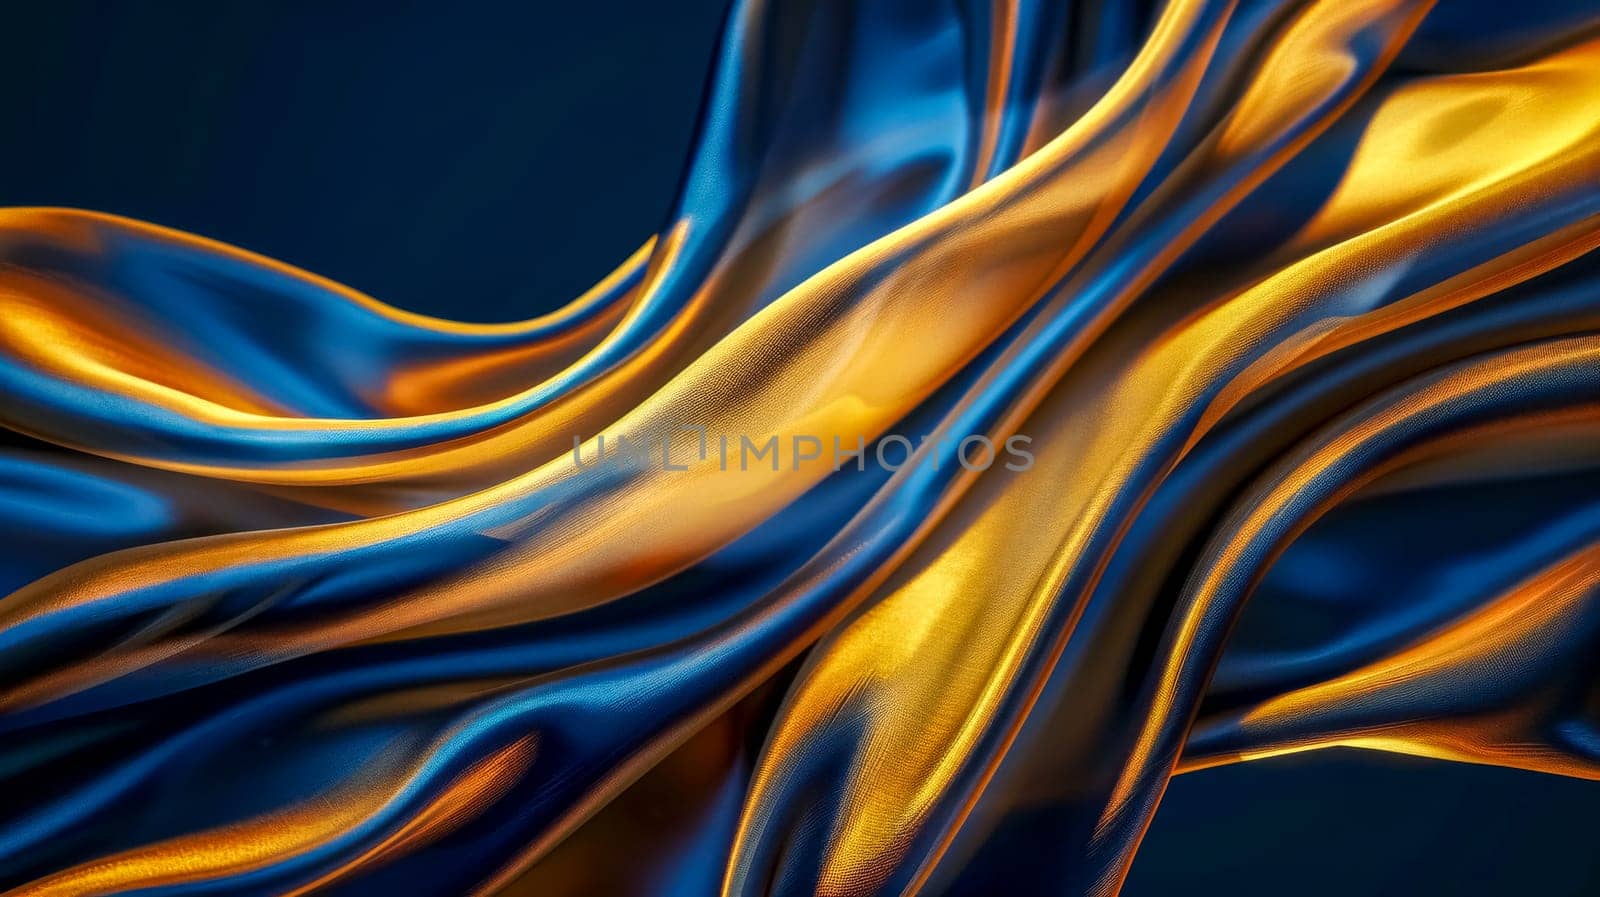 Elegant blue and gold silk fabric waves by Edophoto